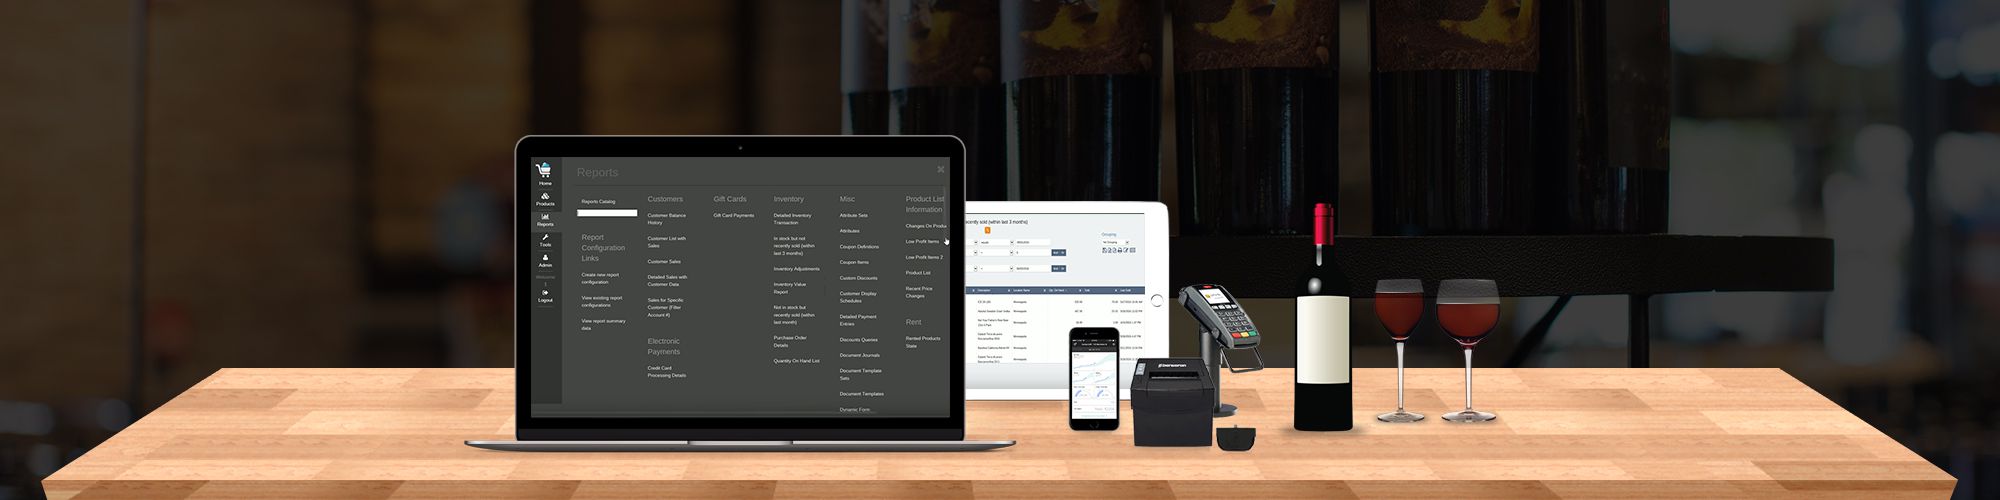 POS System for Liquor Store & Winery